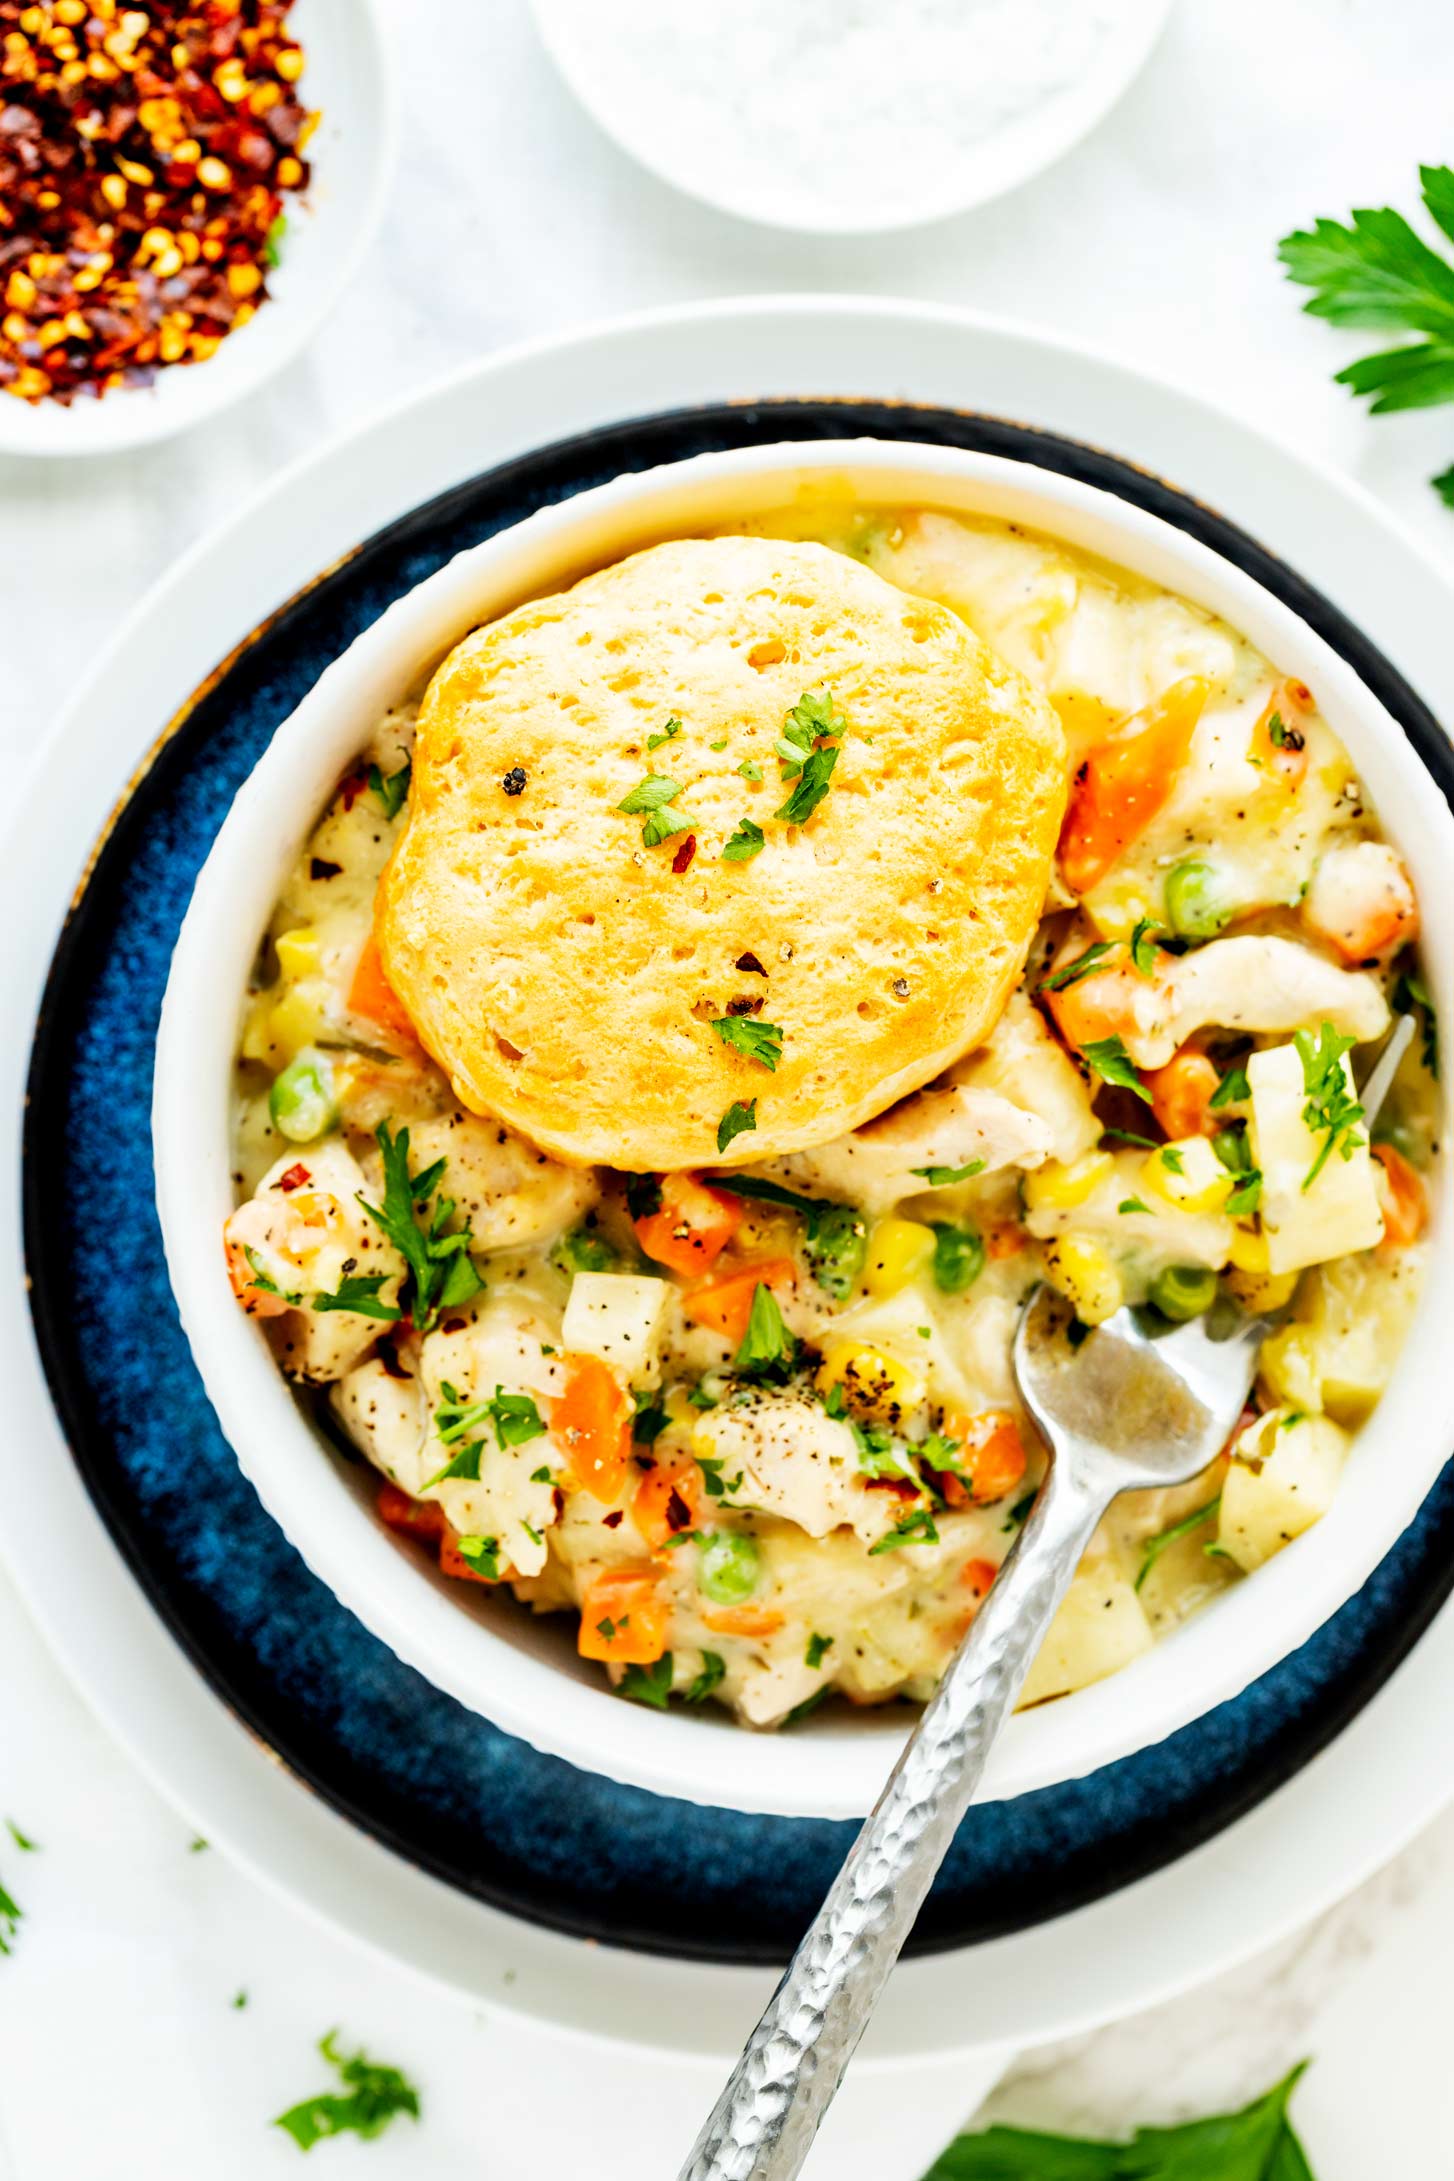 Overhead photo of a Crockpot chicken pot pie with biscuits served in a white bowl set on top of a blue plate.